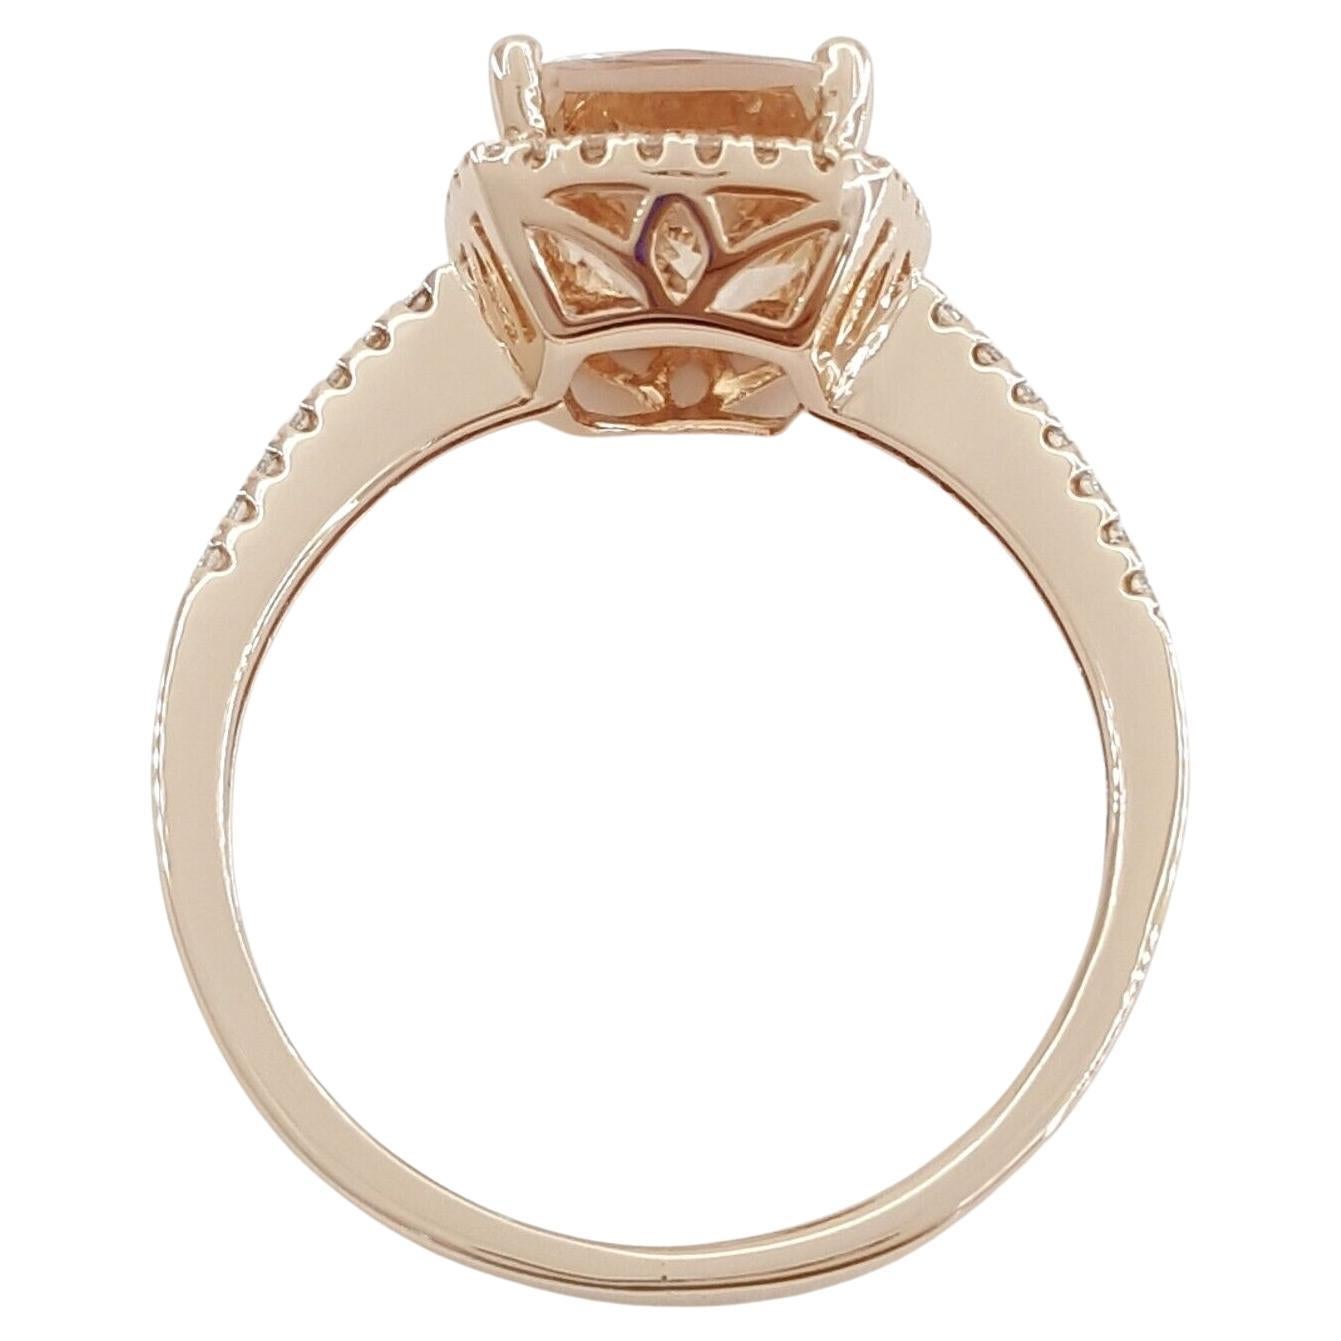 stunning Statement/Cocktail Ring crafted in 14K Rose Gold, featuring a Peach Morganite and a total of 0.22 carats of Diamonds.

Weighing a delicate 2.8 grams and sized at 6.5, this ring boasts a center stone in the form of a Rectangular Cushion